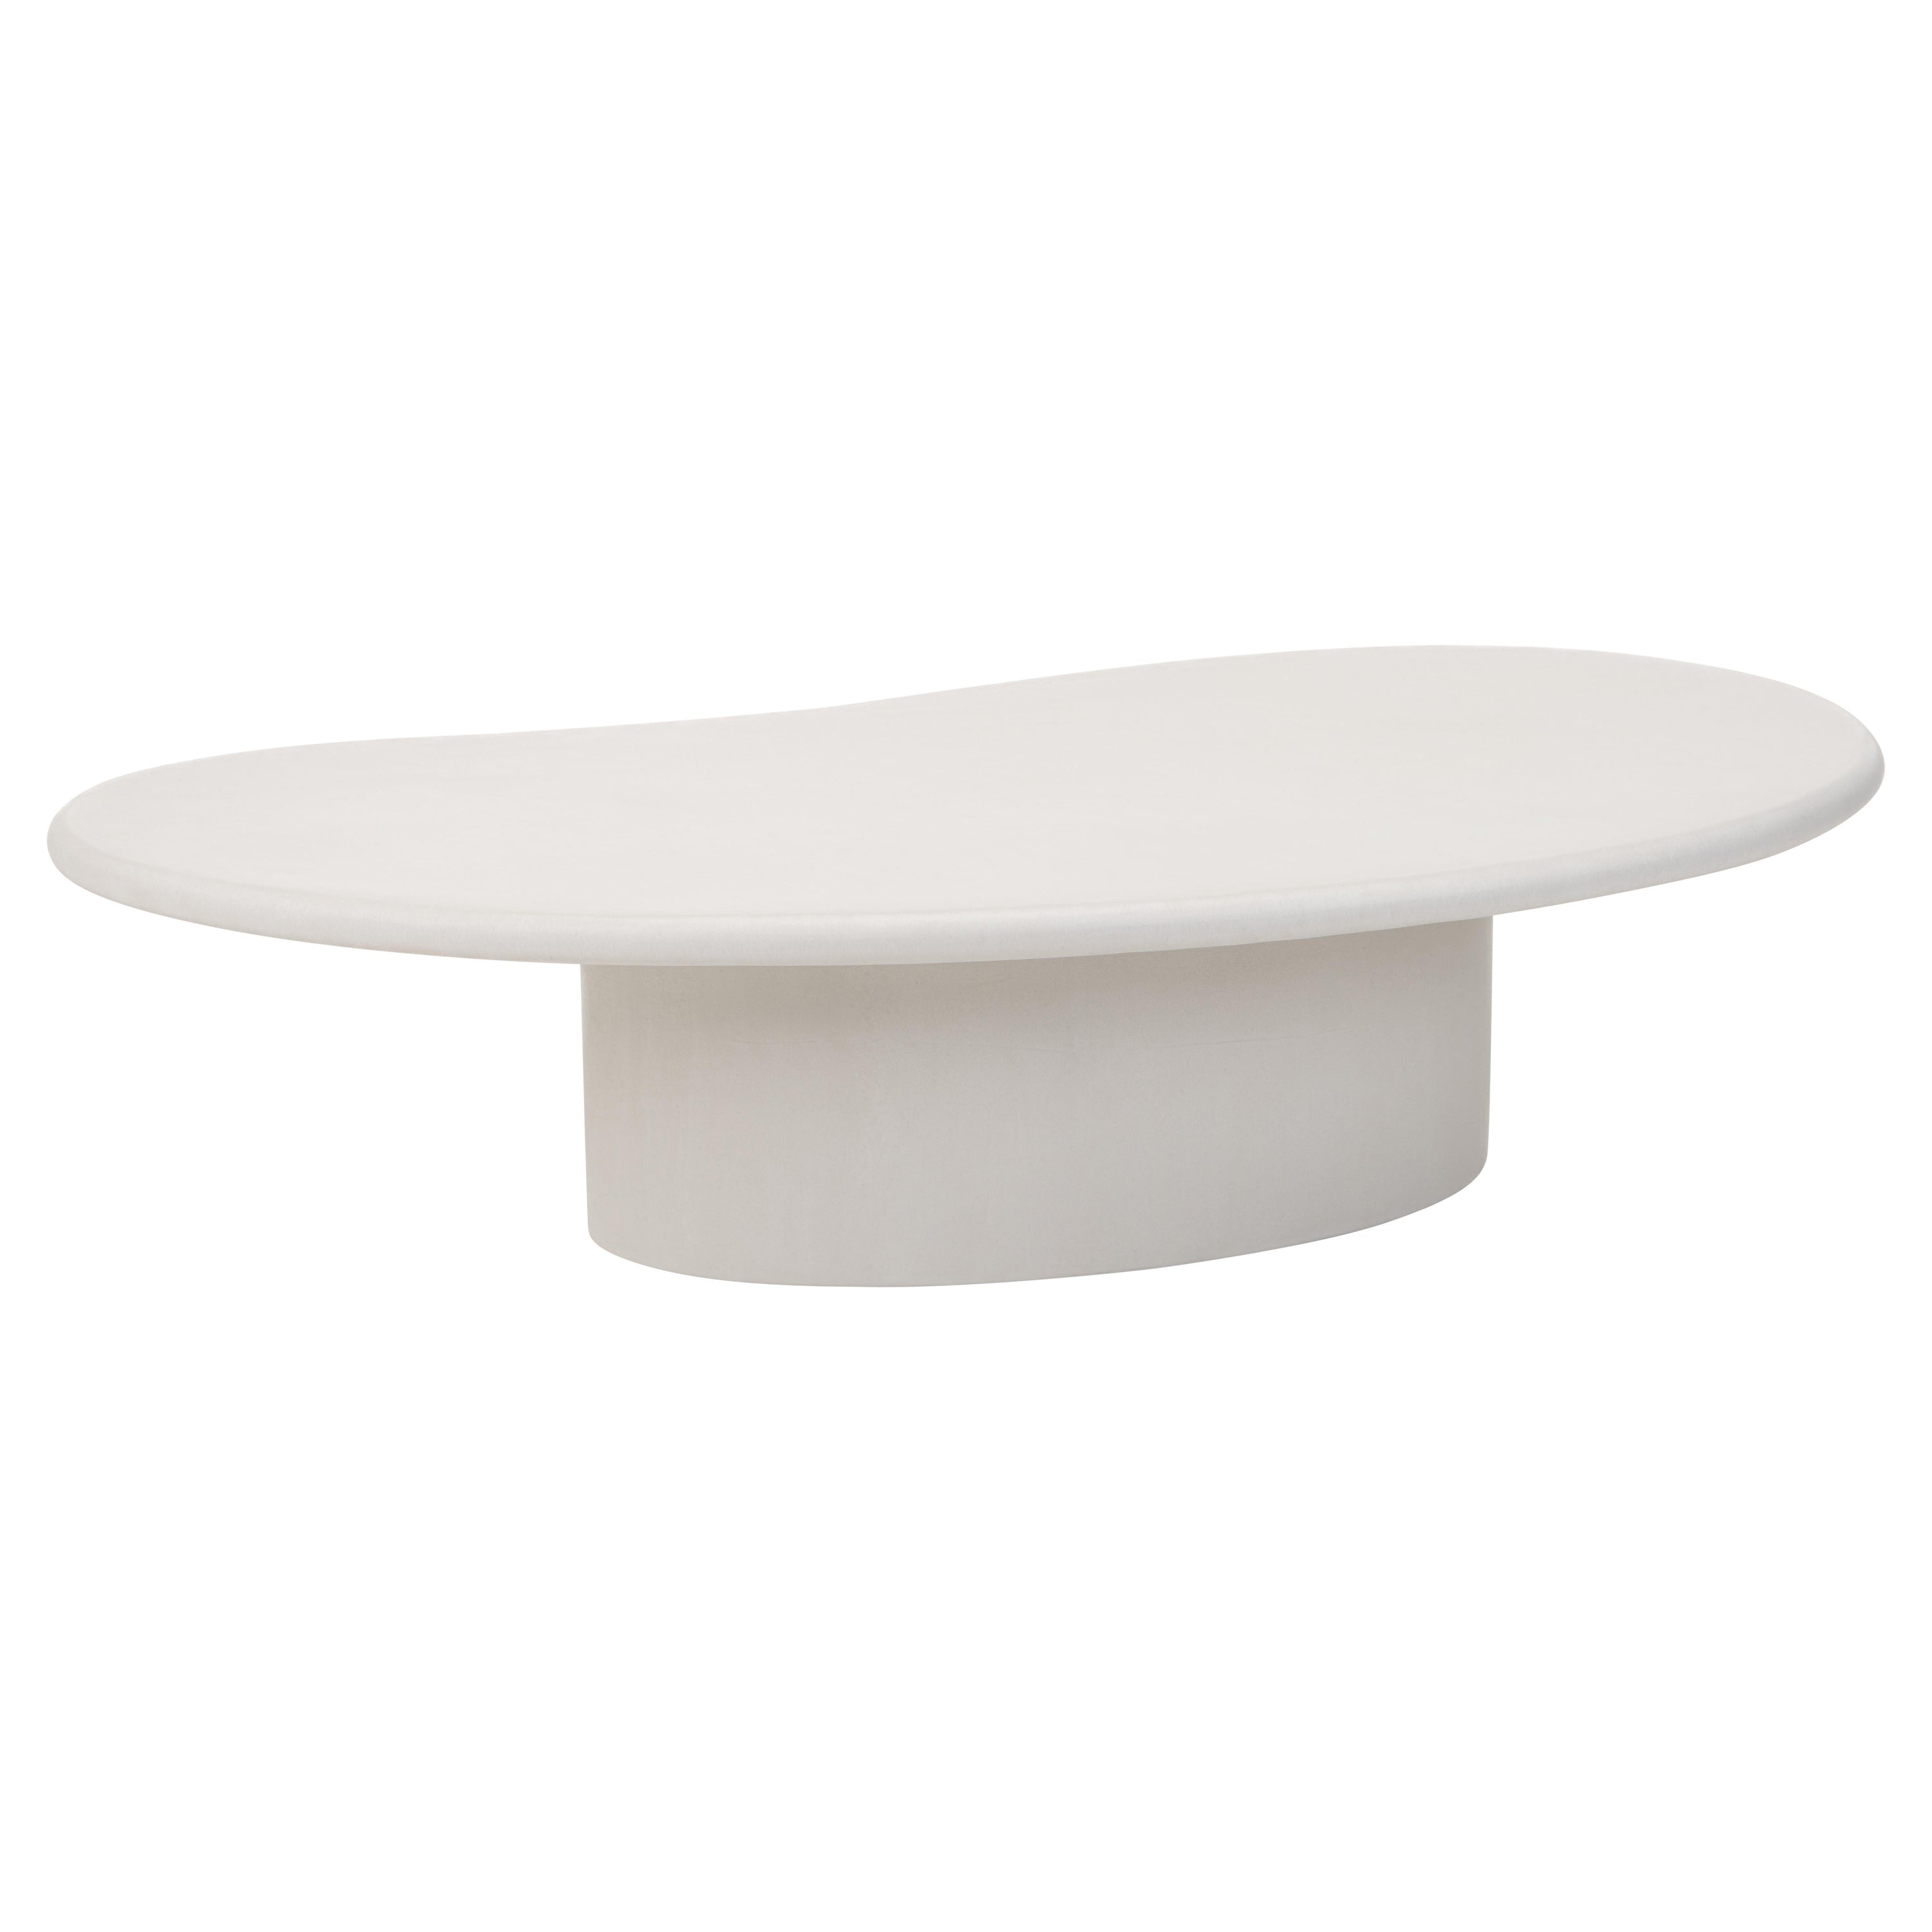 Organic Shaped Mortex Coffee Table "Angus" 150 BM02 by Isabelle Beaumont